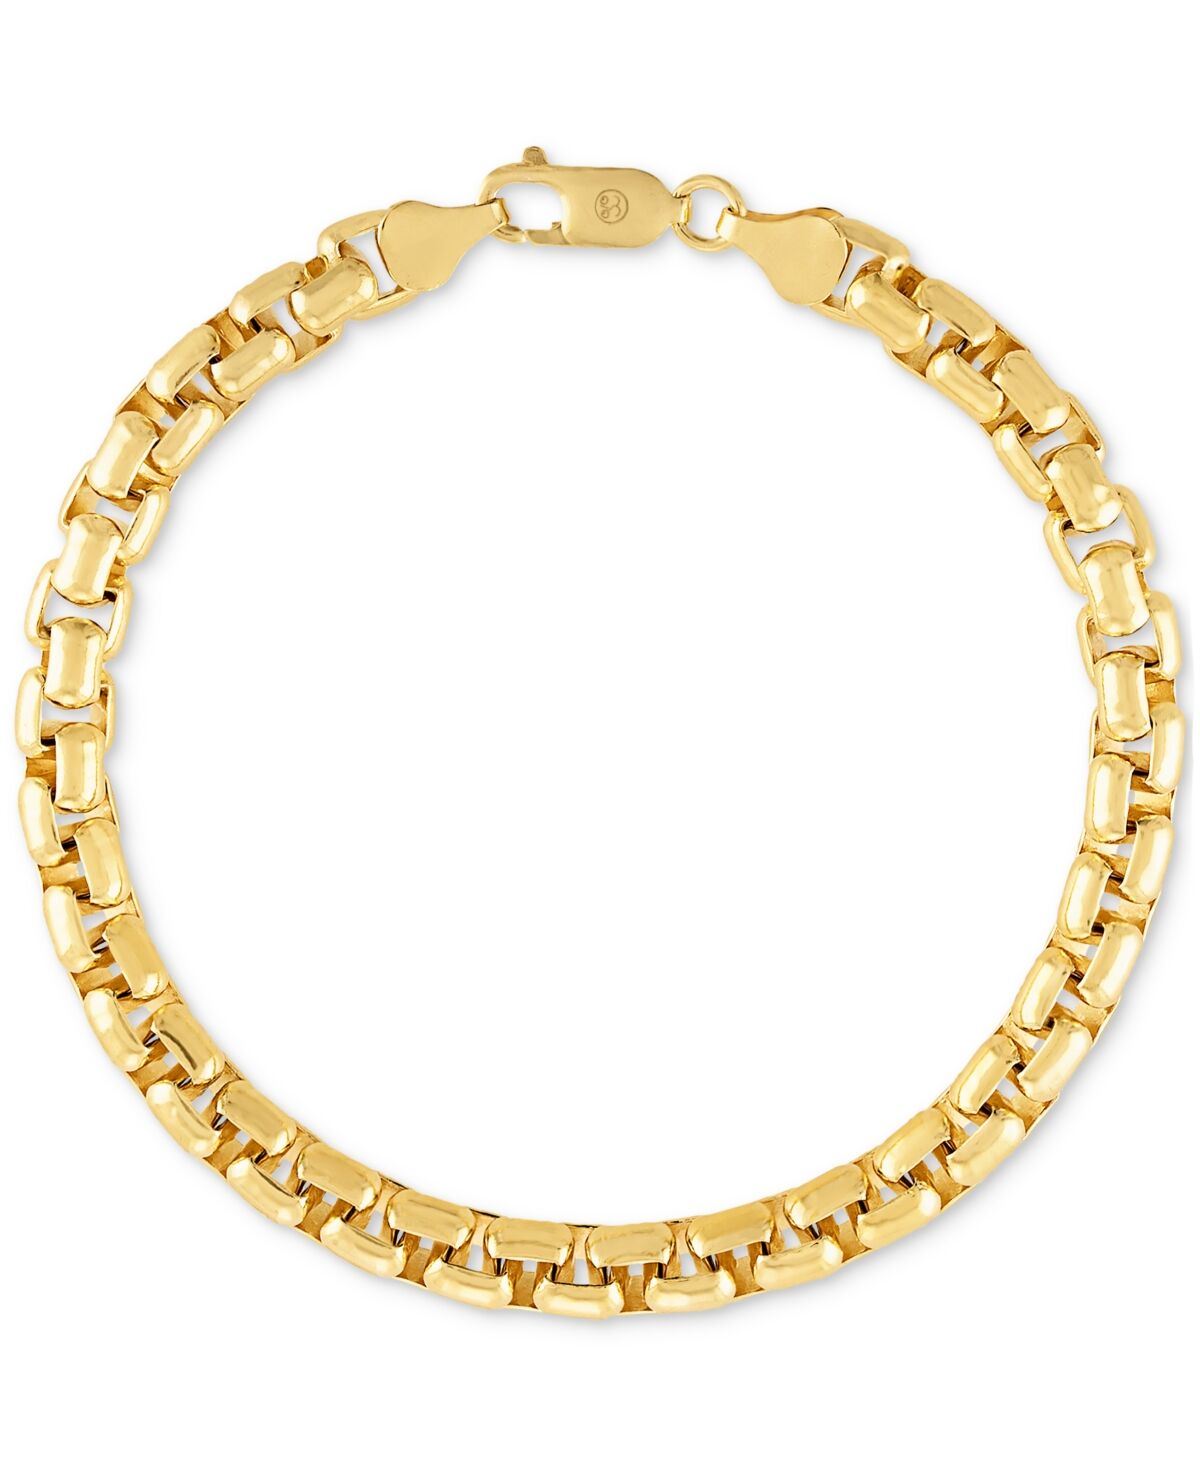 Esquire Men's Jewelry Rounded Box Link Chain Bracelet in 14k Gold-Plated Sterling Silver, Created for Macy's - Gold